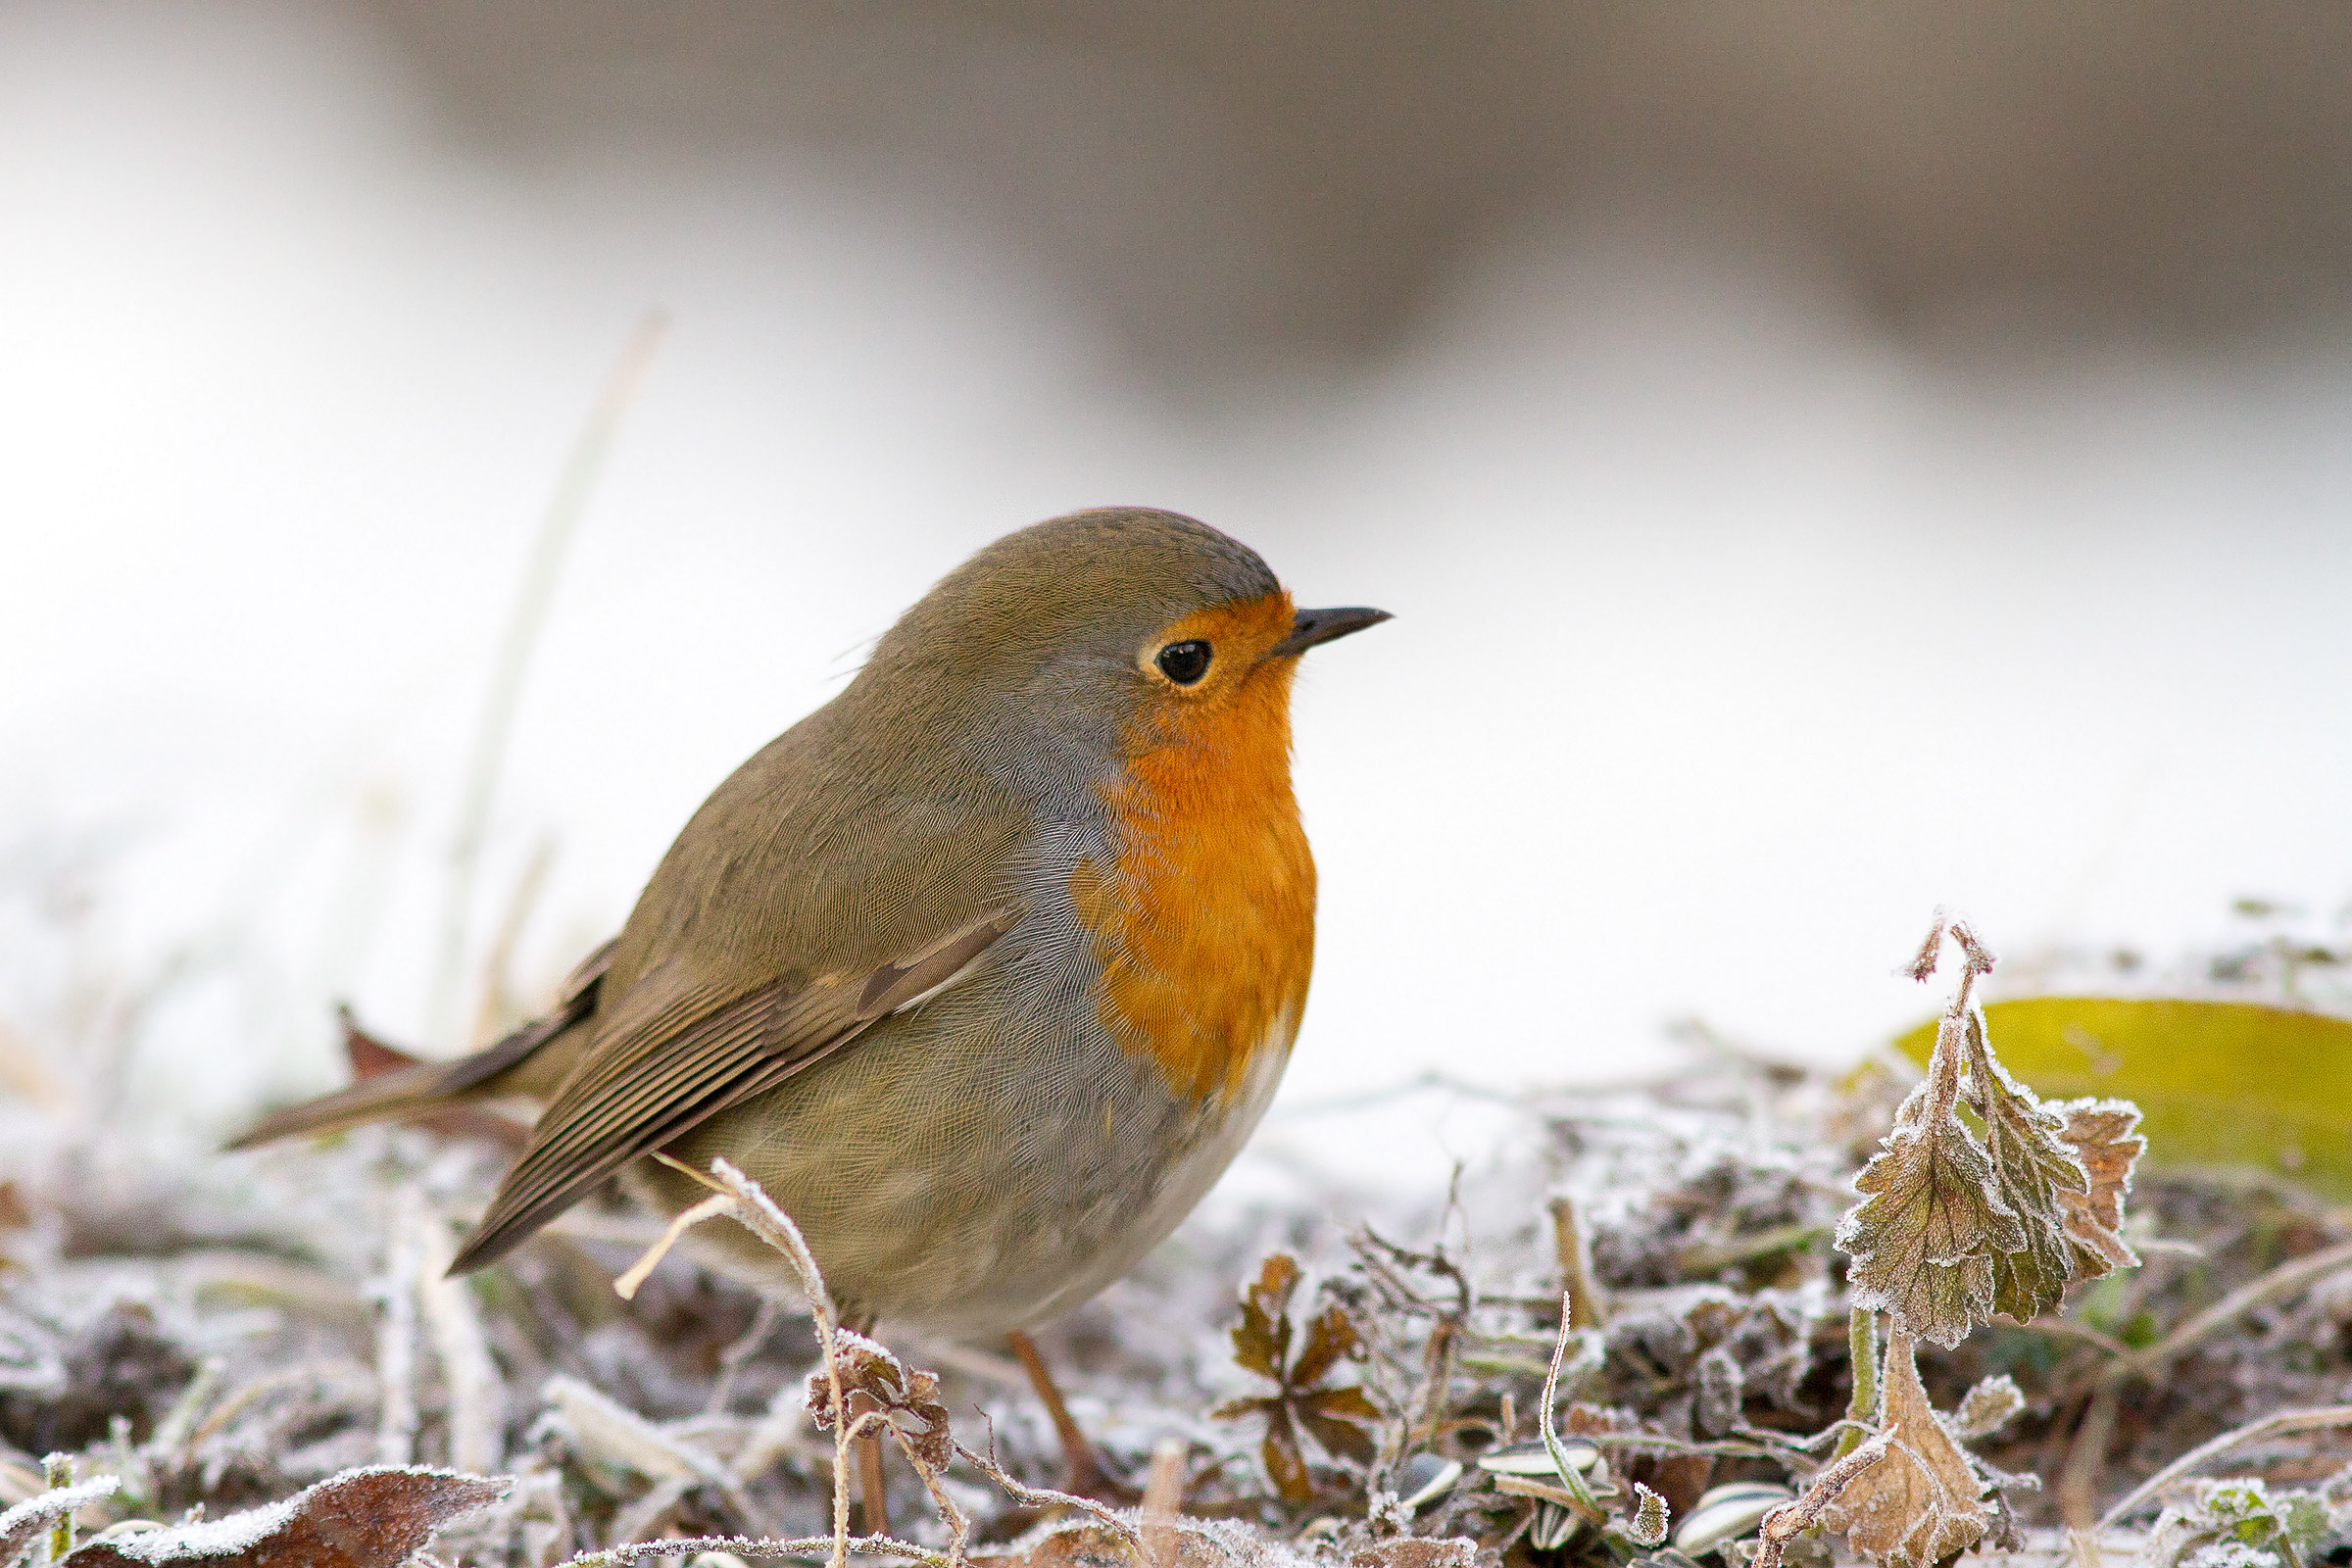 Robin hunting in the cold...